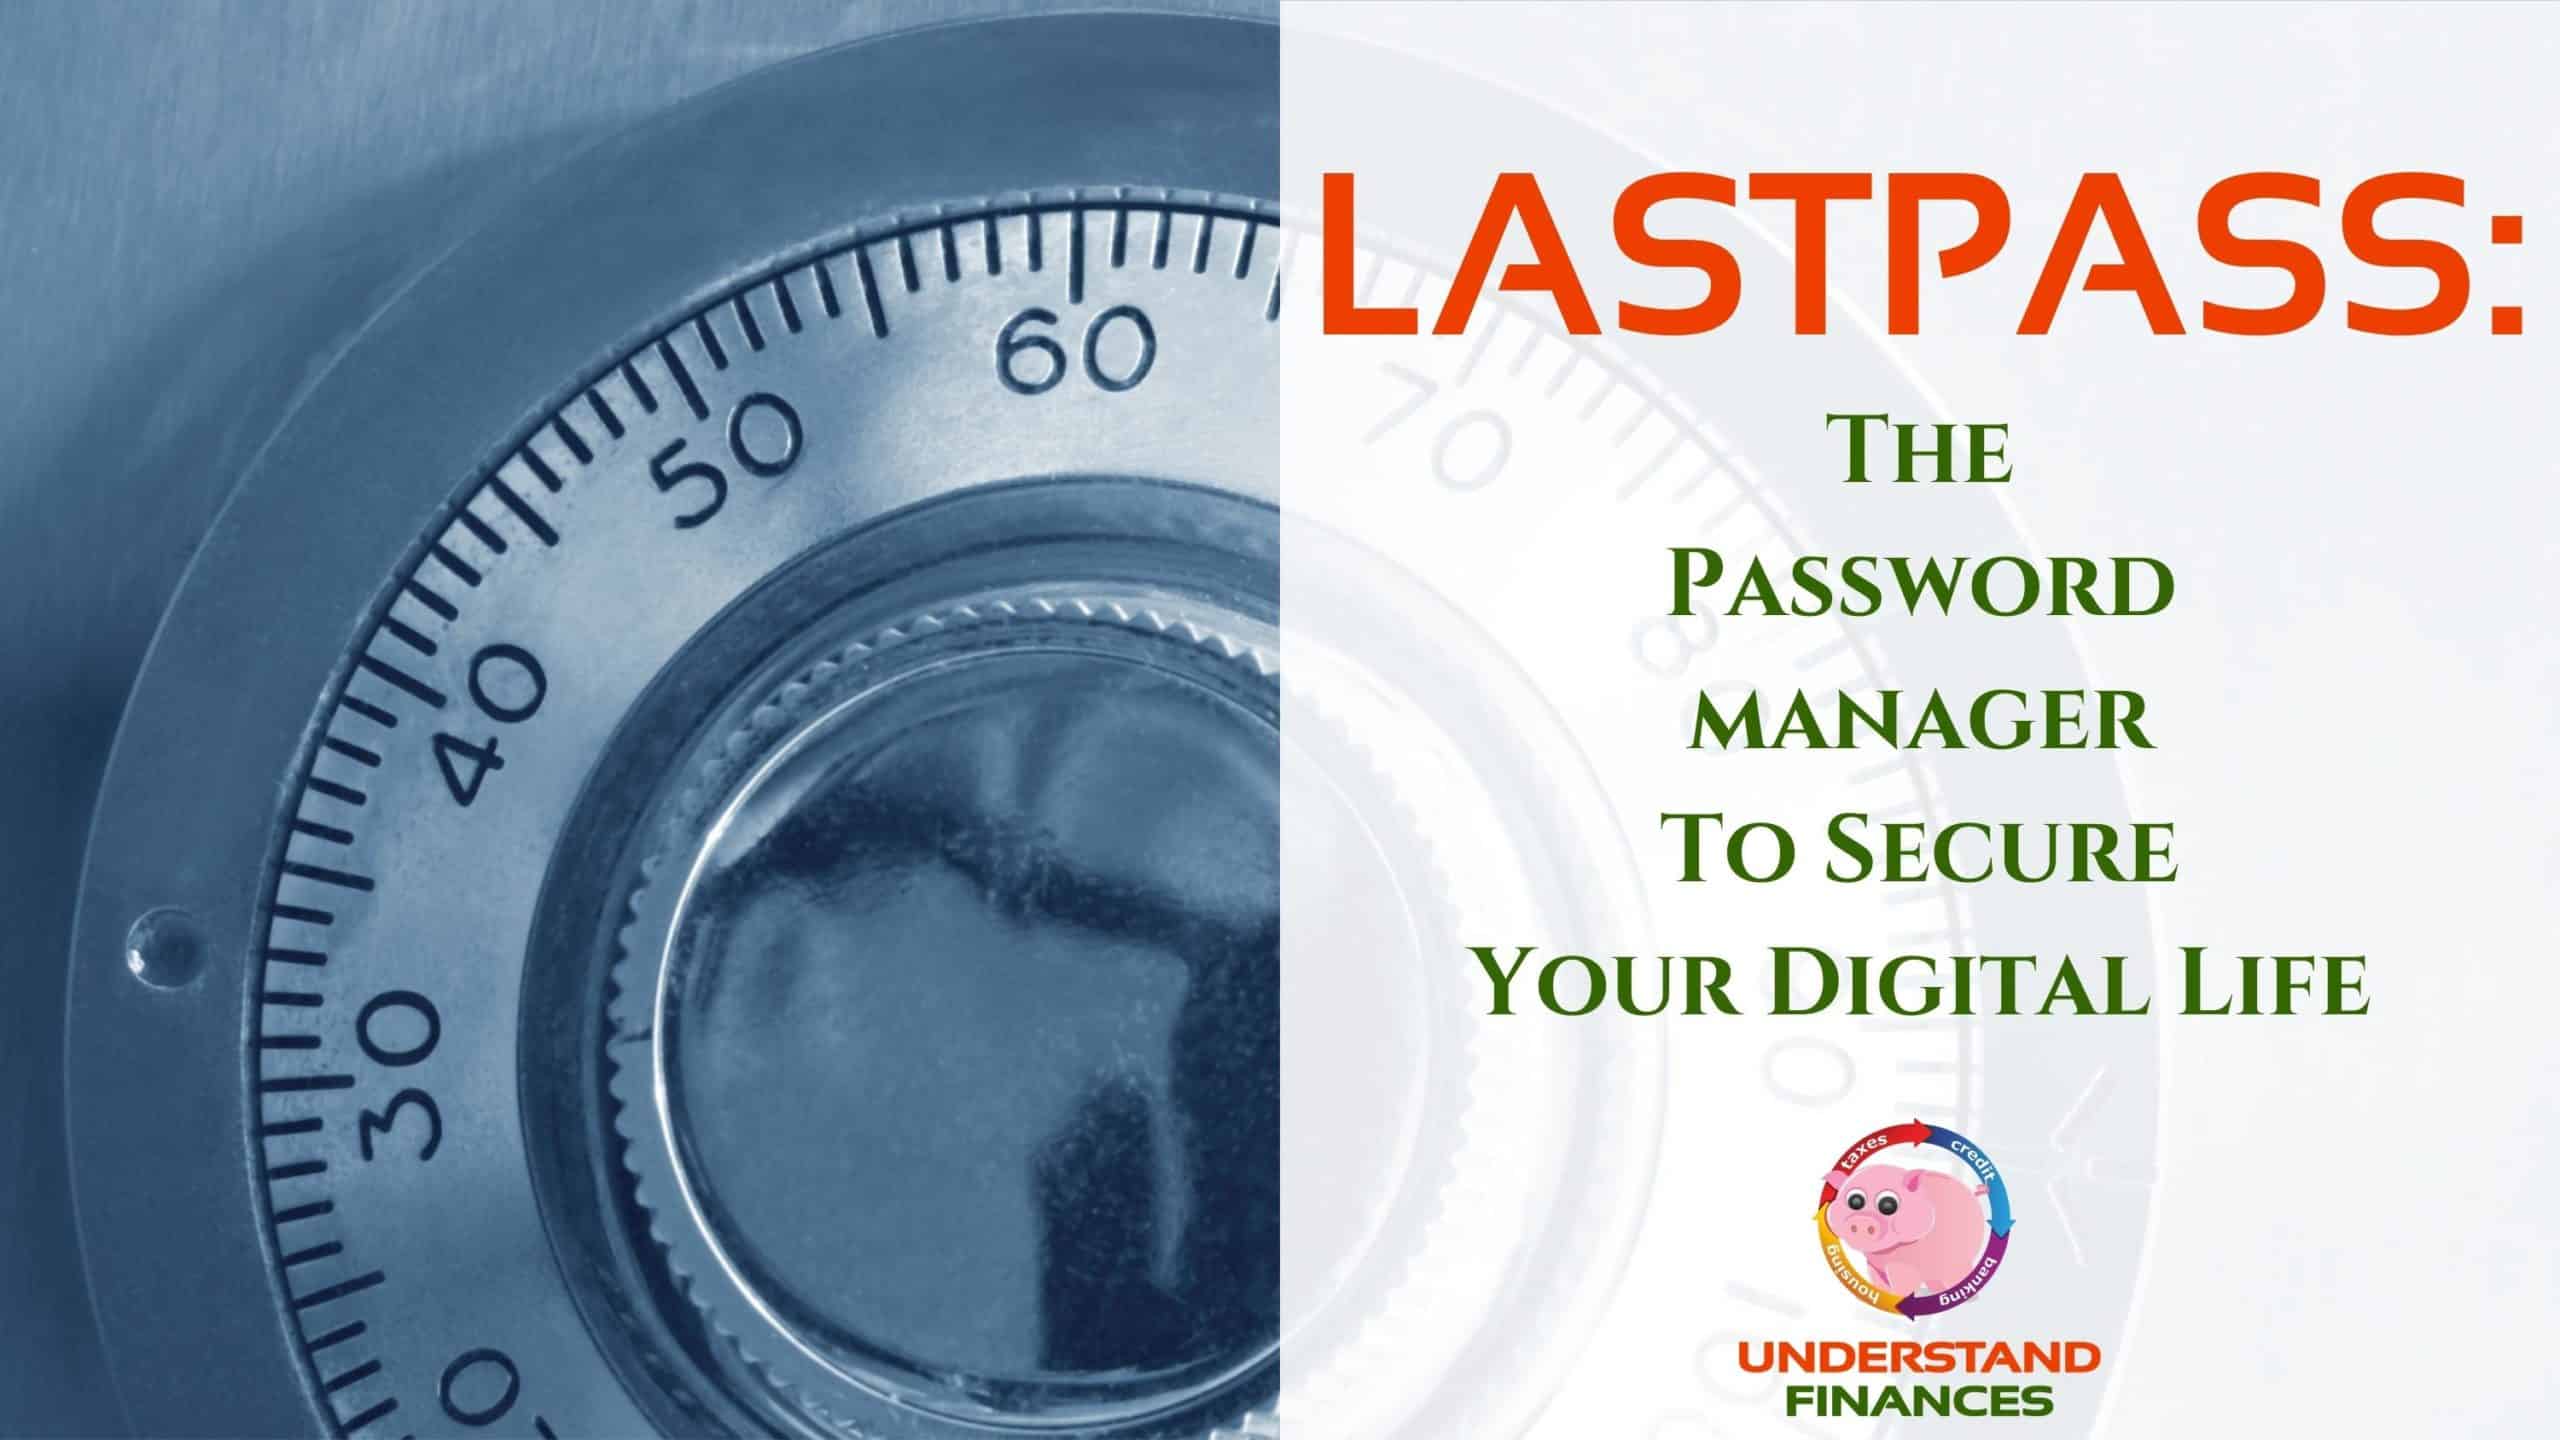 Lastpass The Password Manager scaled